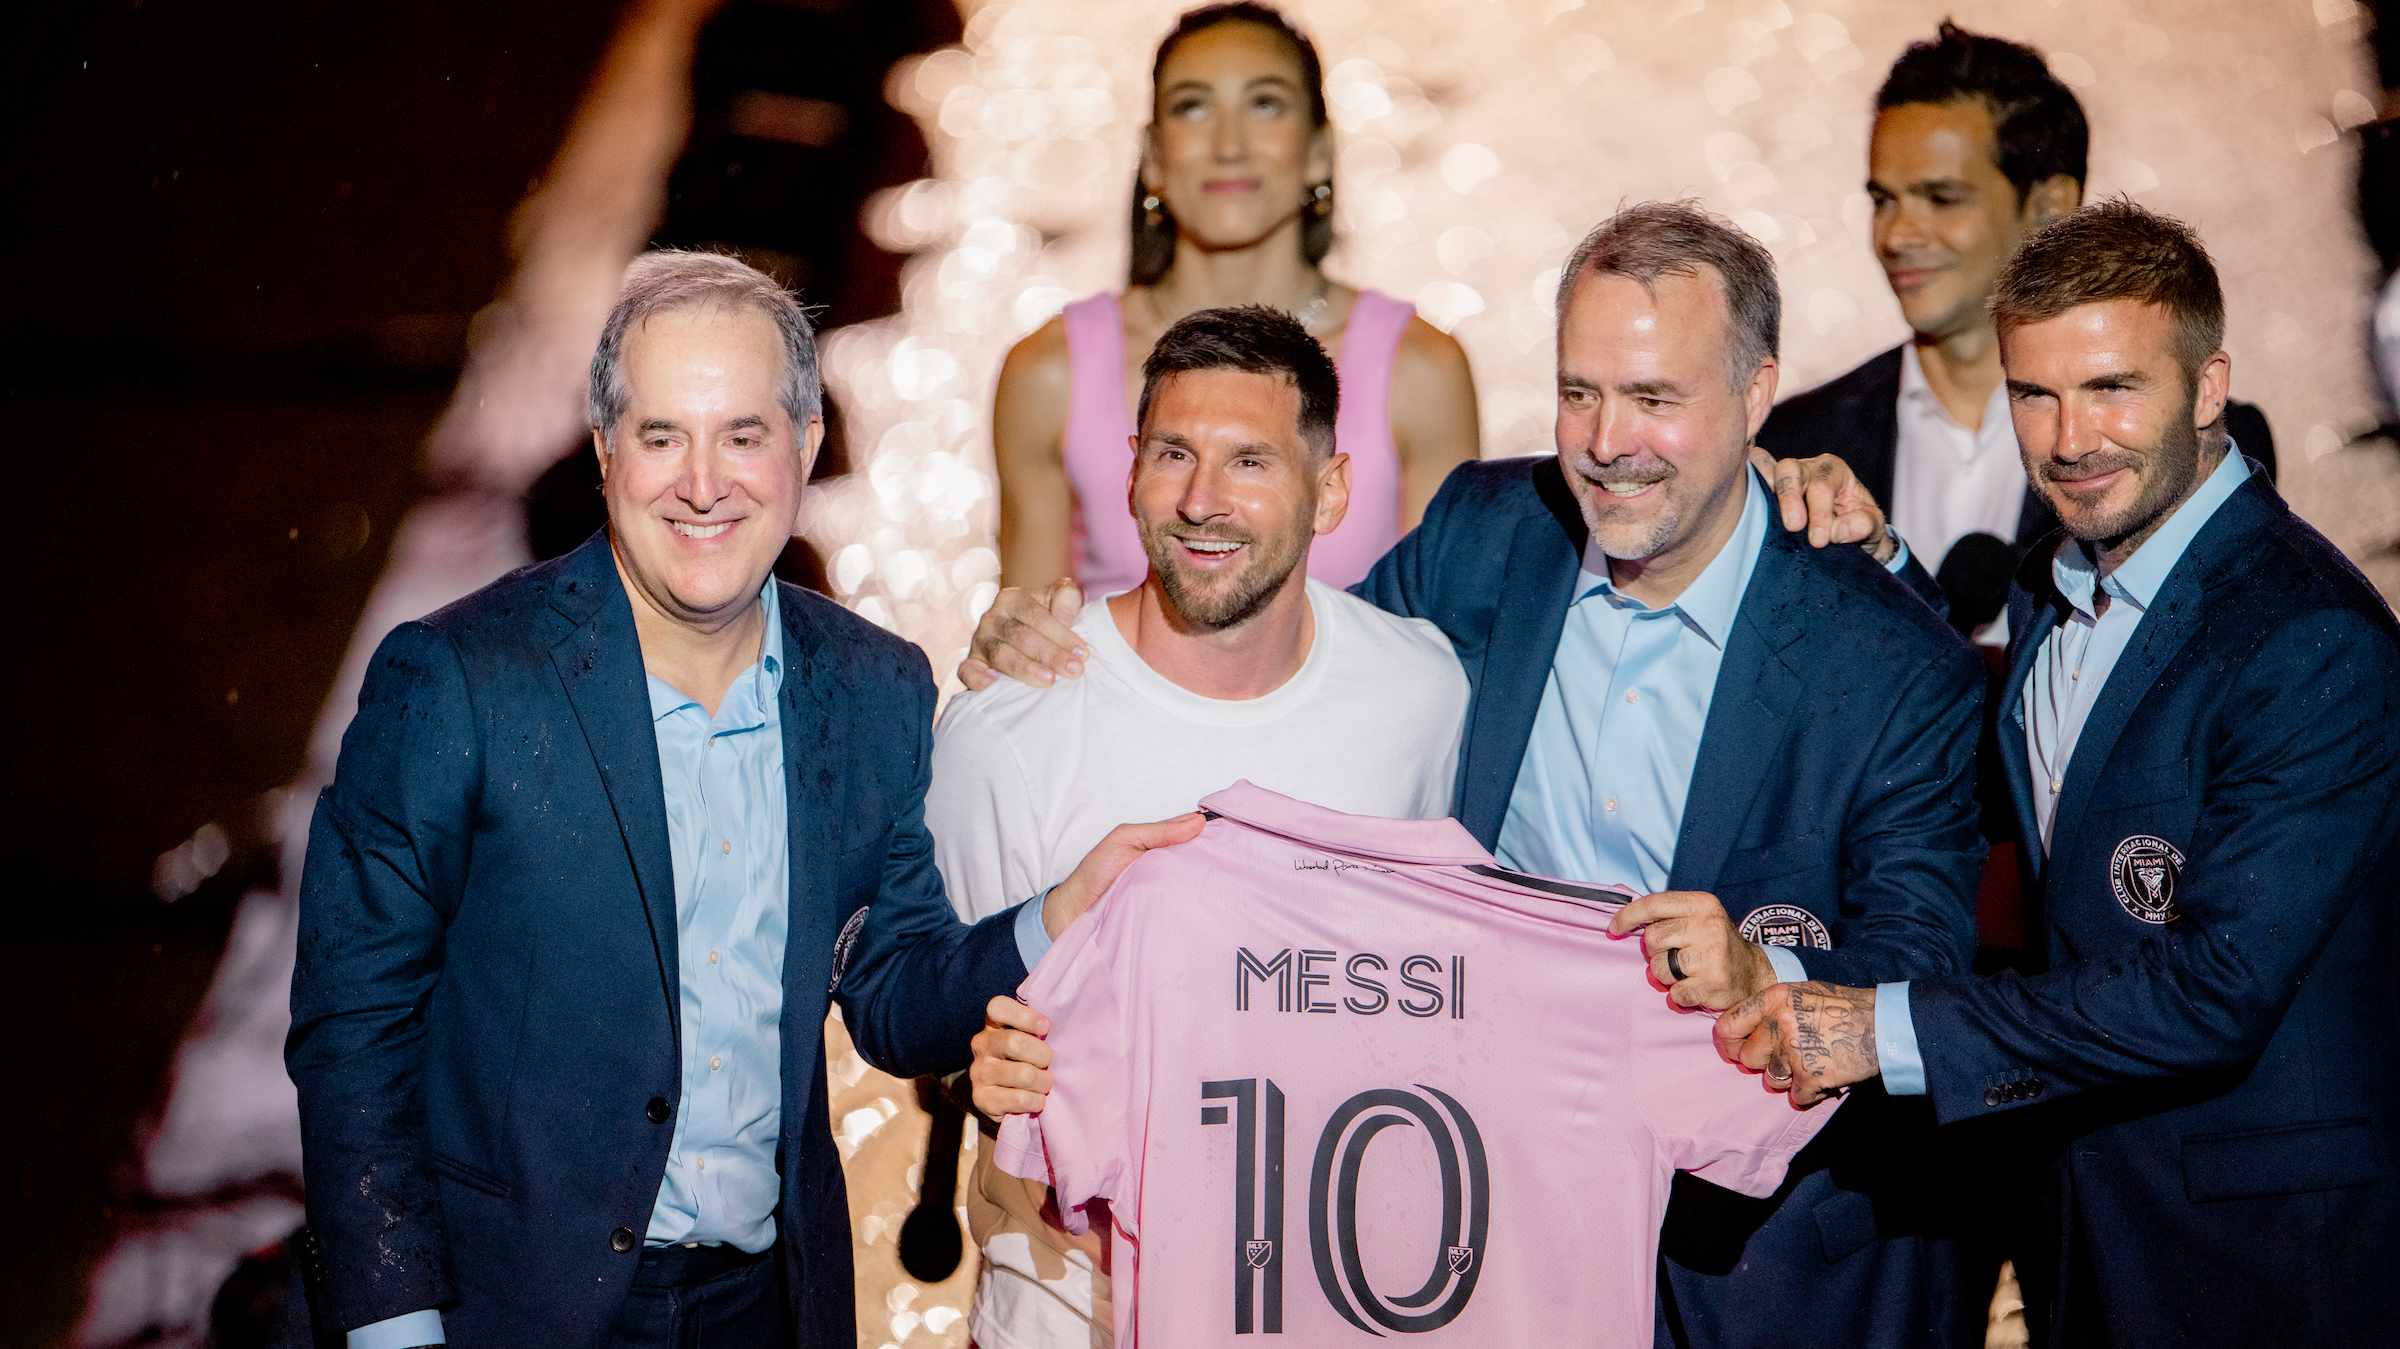 Lionel Messi Joins Inter Miami: An Exciting New Era Begins for the